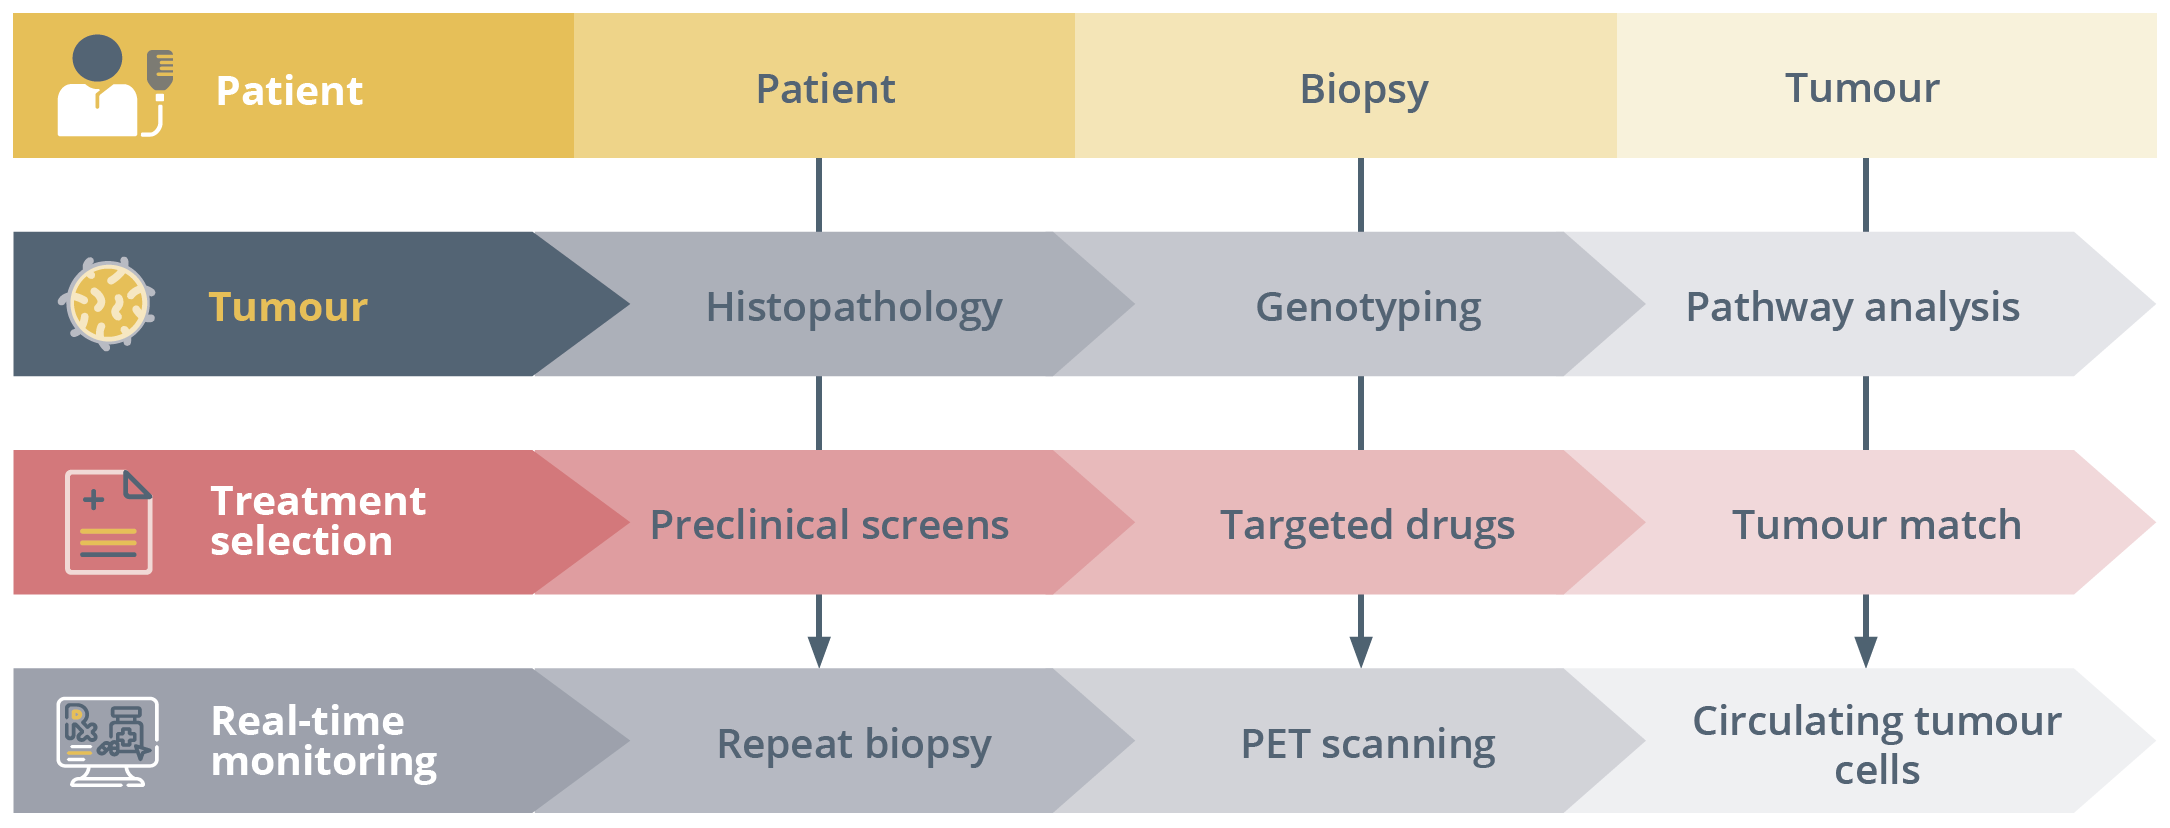 The patient's cancer undergoes biopsy for detailed biomarker analysis